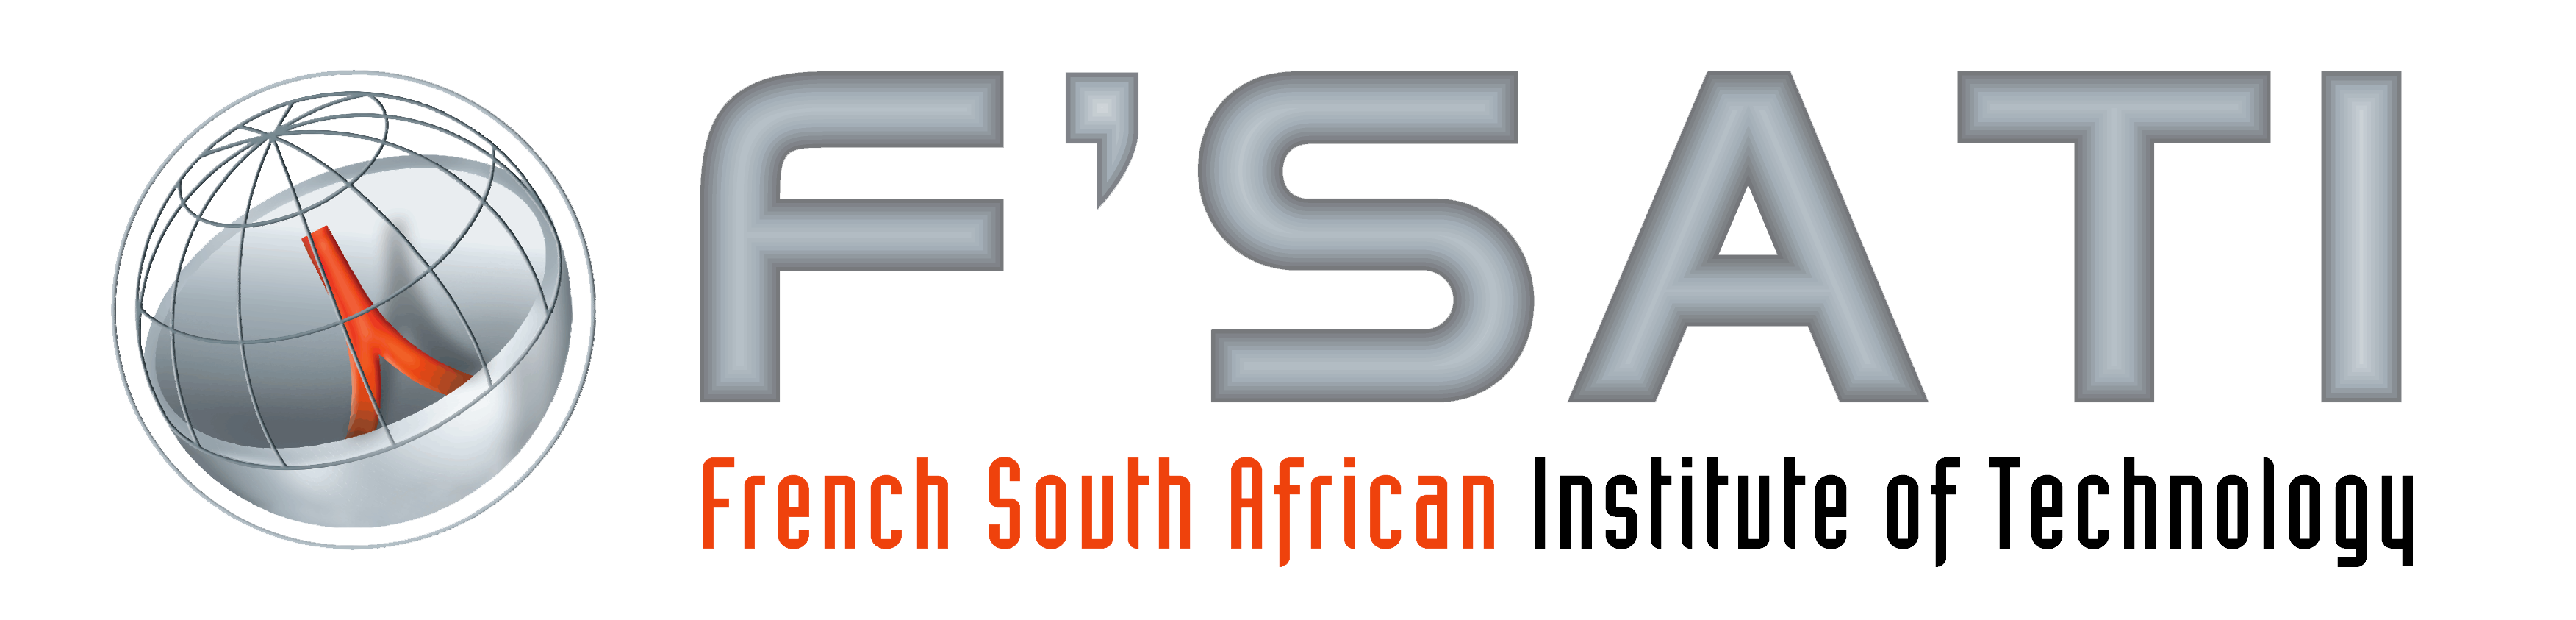 French South African Institute of Technology